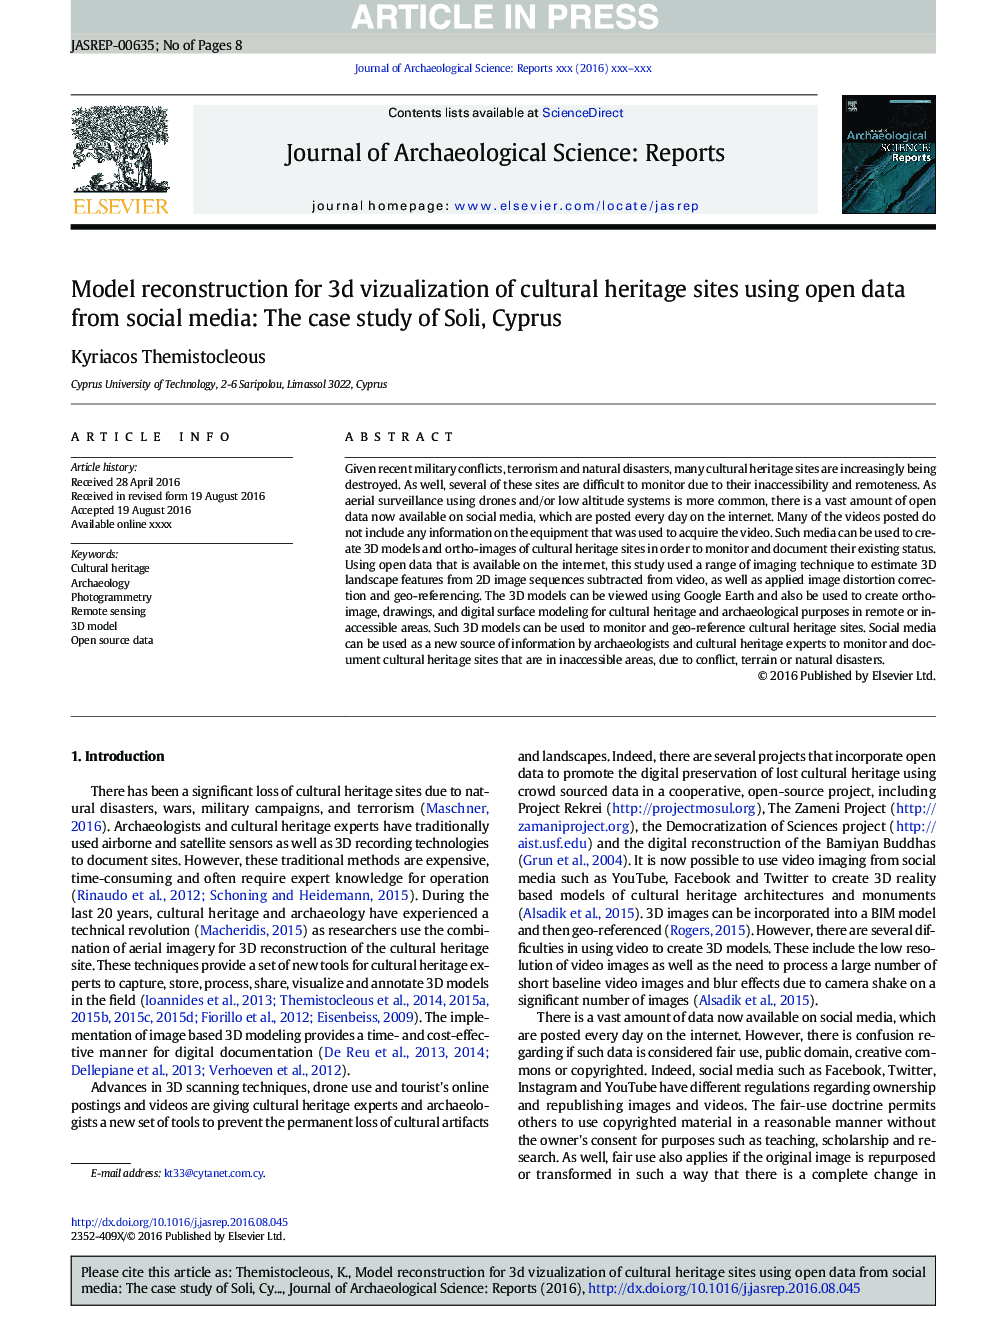 Model reconstruction for 3d vizualization of cultural heritage sites using open data from social media: The case study of Soli, Cyprus